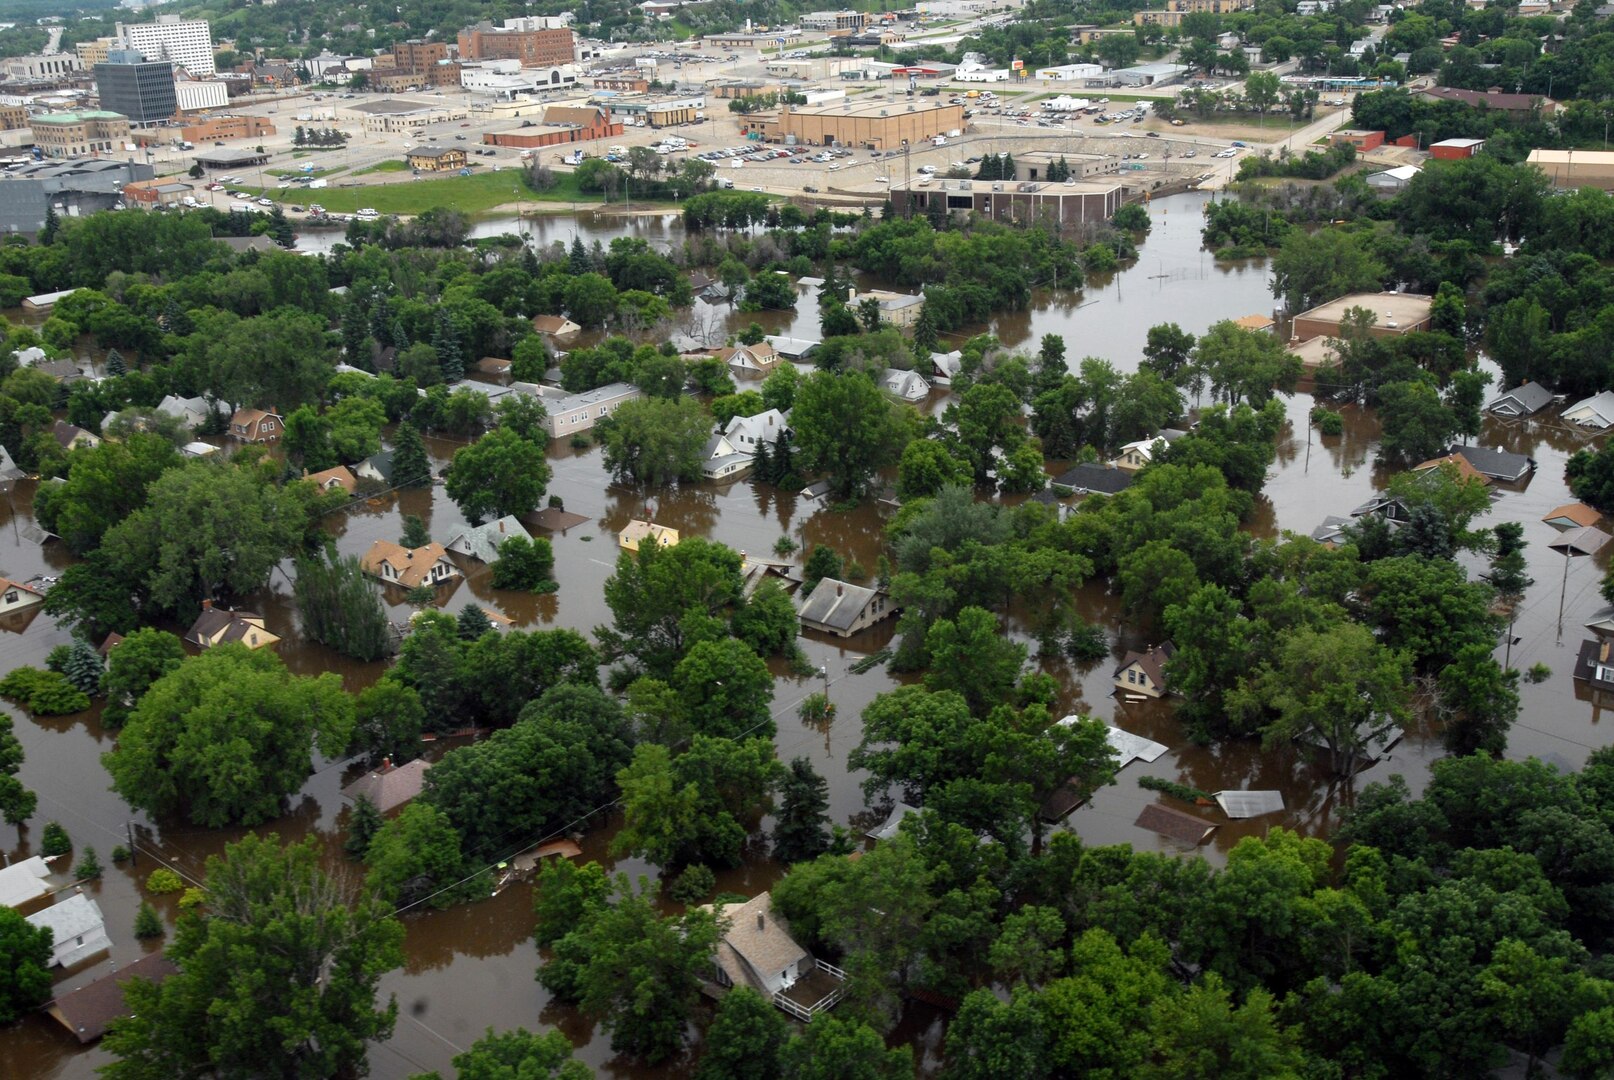 Floodwaters overwhelmed several neighborhoods in the Minot, N.D., area, reaching the south part of the city, pictured in the background here June 26, 2011. The National Guard and civilian agencies were able to construct levees to hold back the water and keep it from destroying more properties.